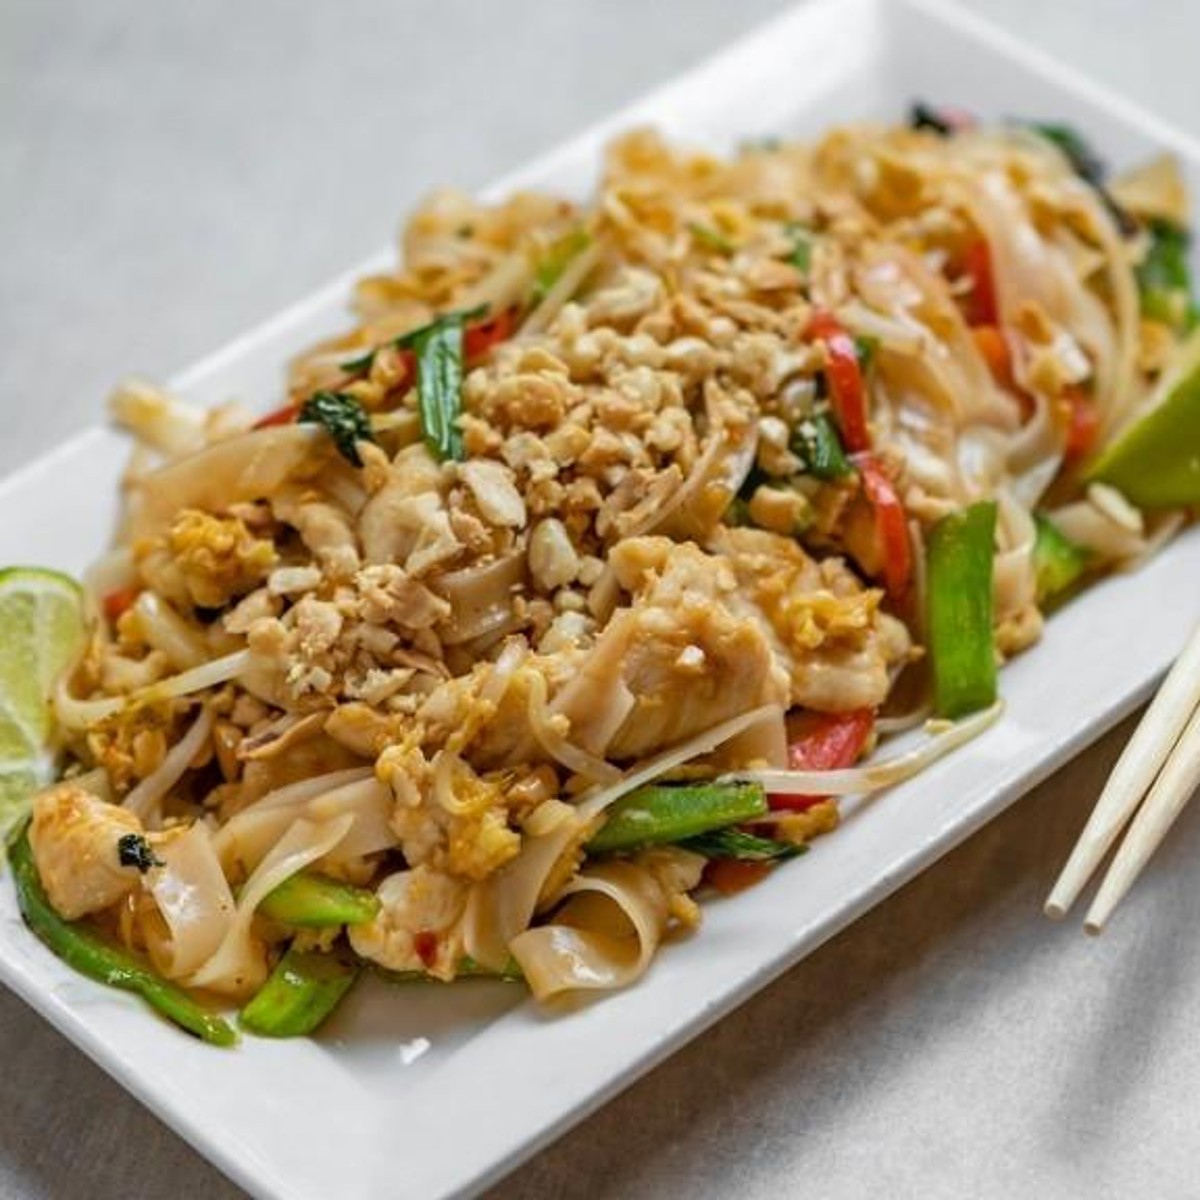 Downtown Overland Park home to new Lulu's Thai Noodle Shop